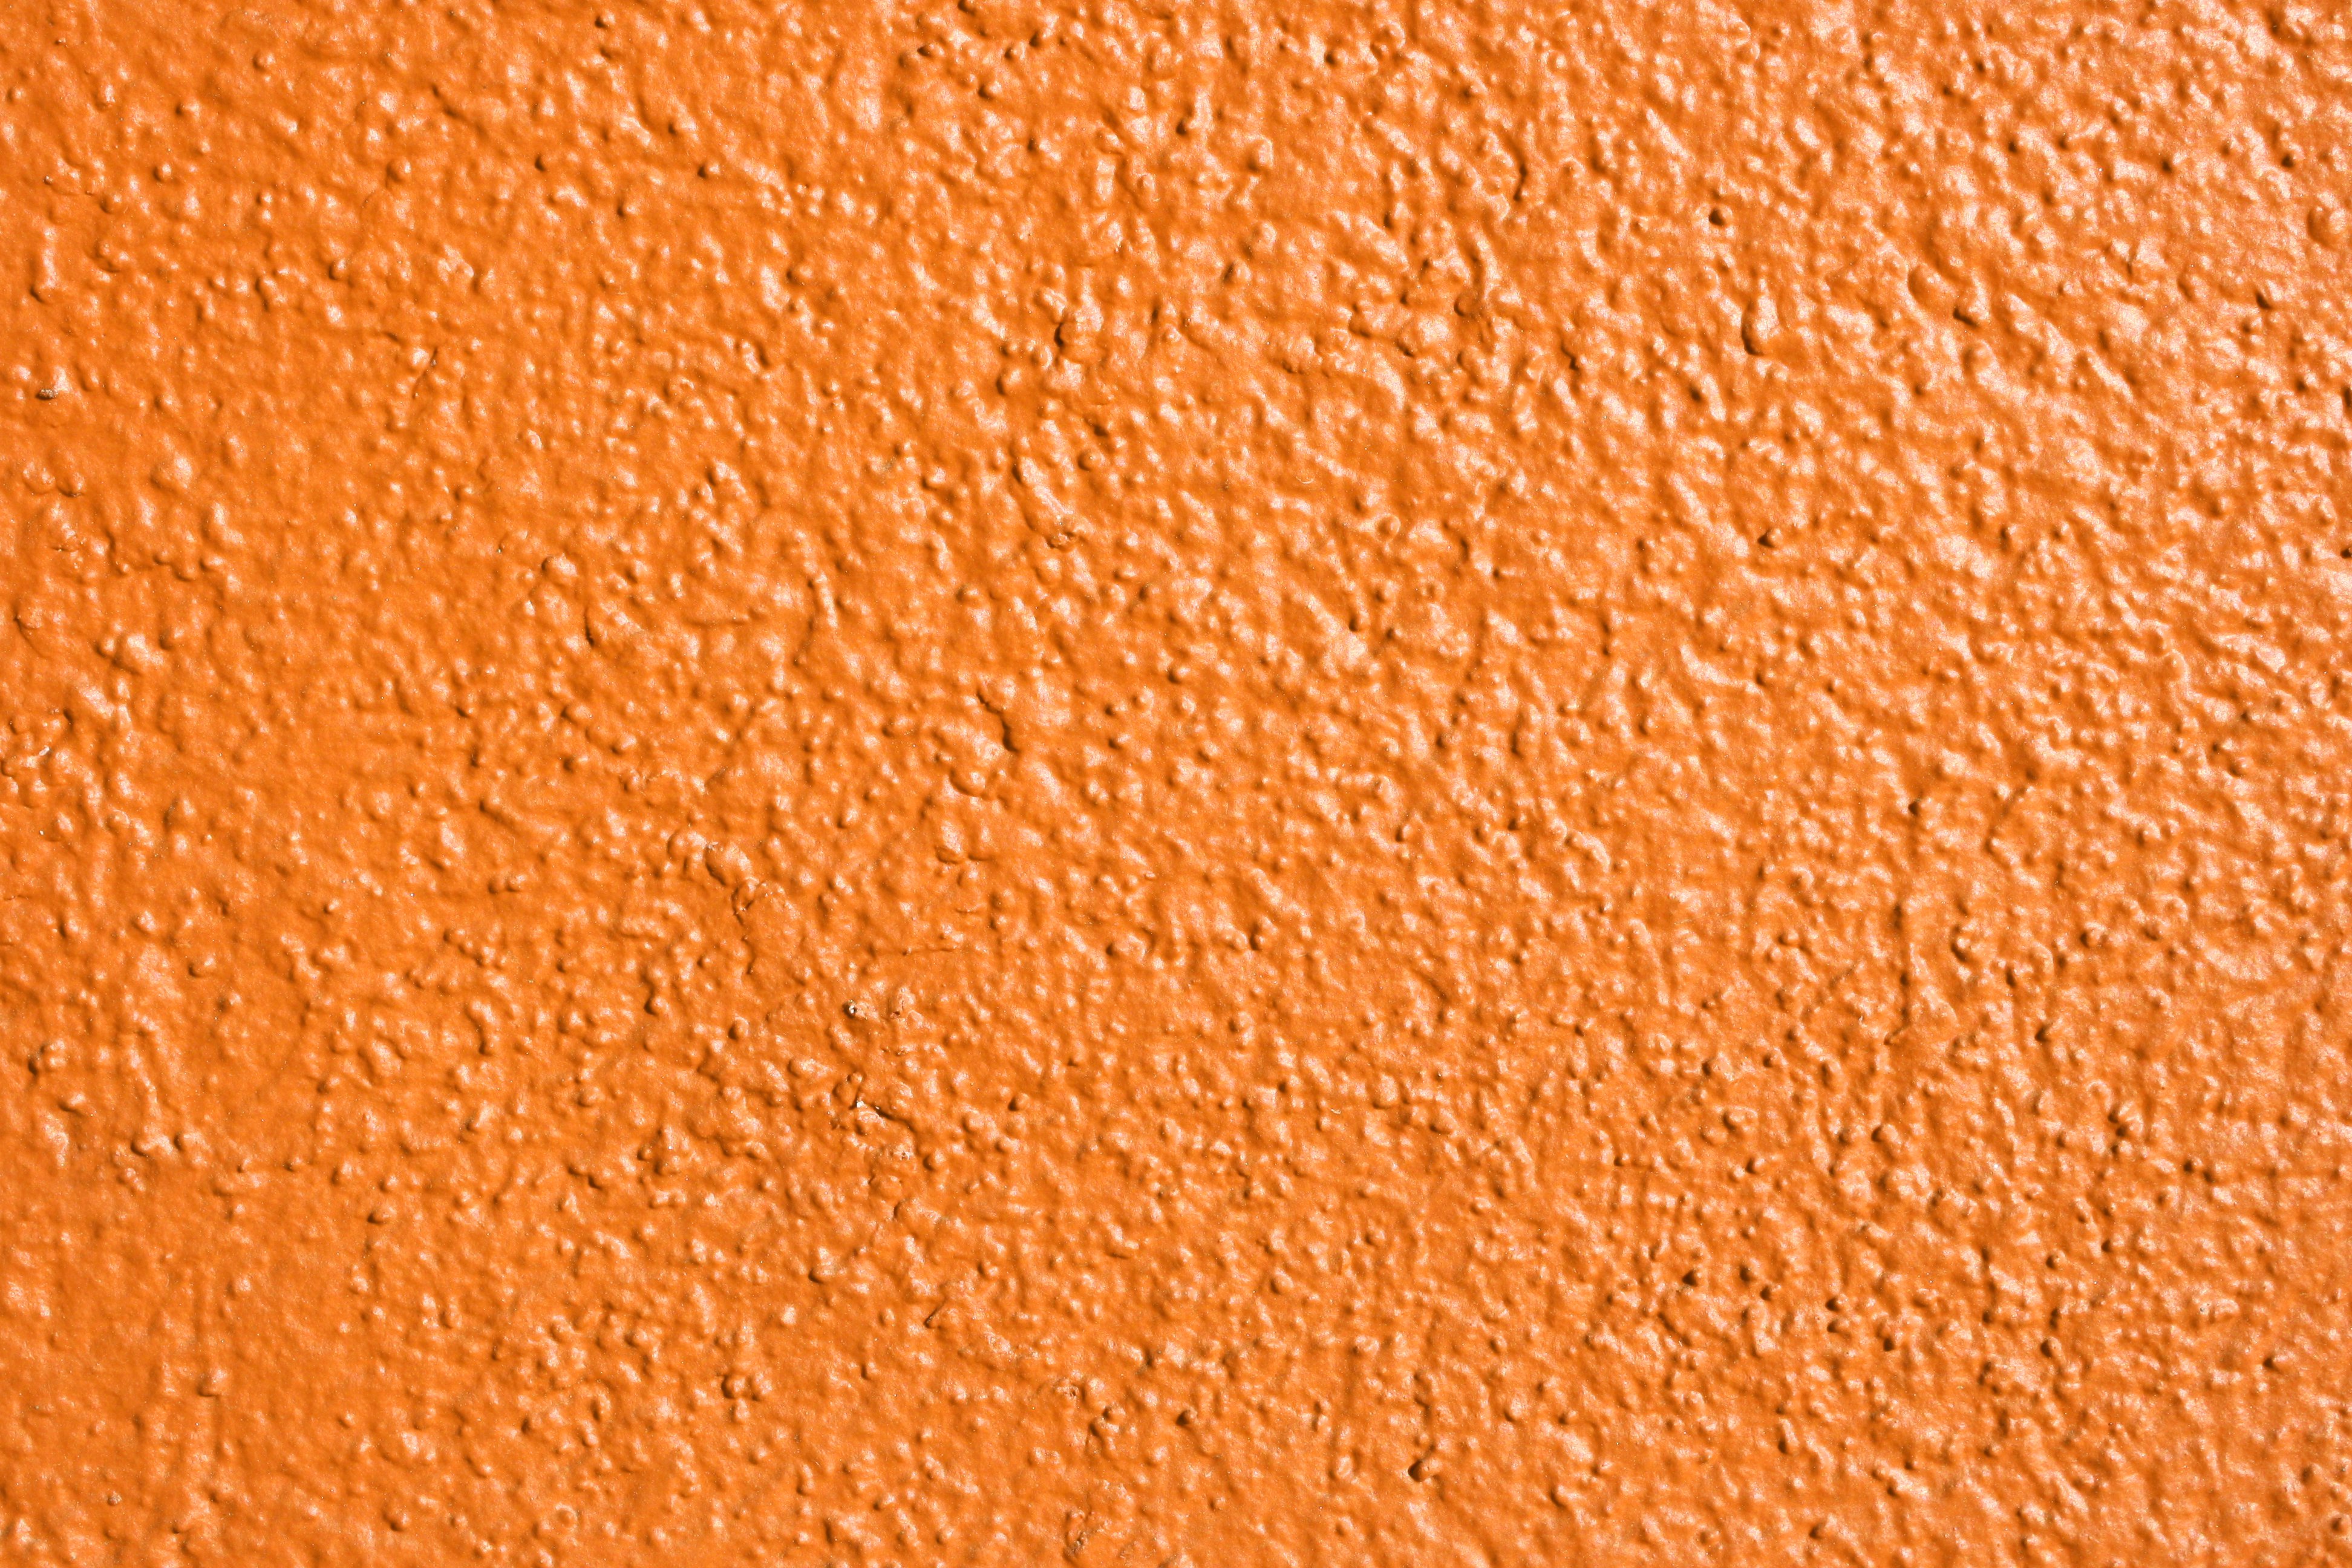 Orange Painted Wall Texture Picture | Free Photograph | Photos ...